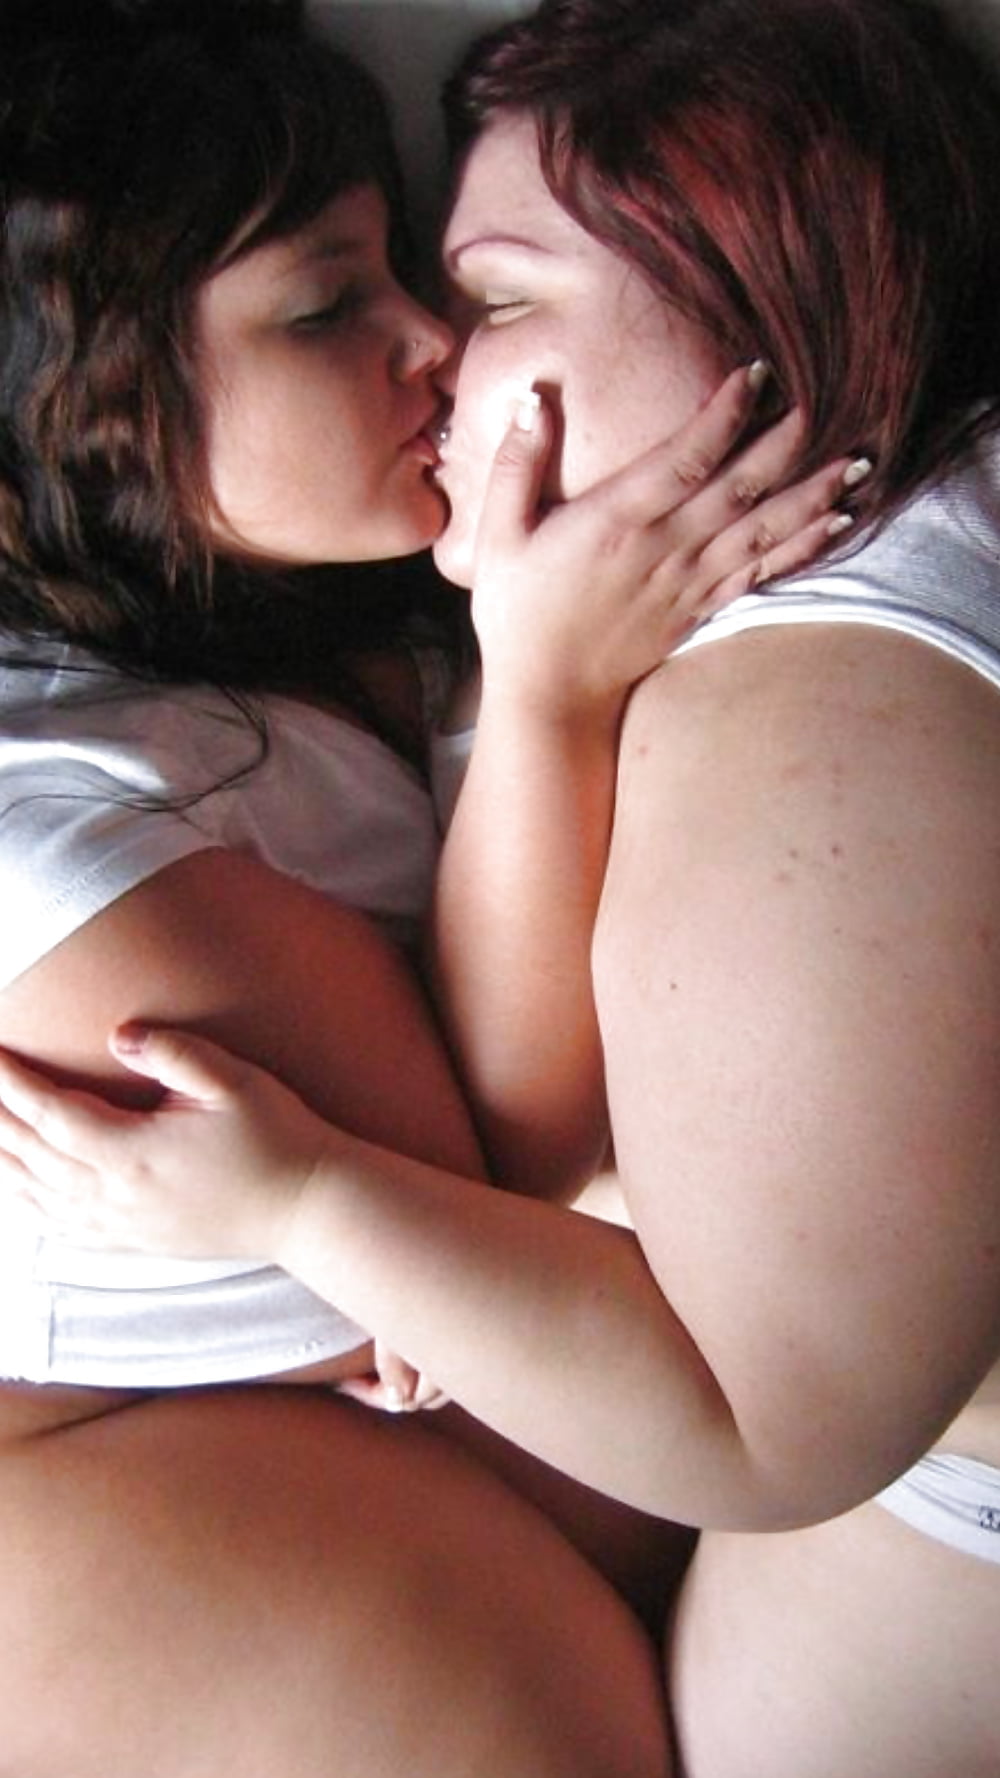 Bbw Kissing Pics And Sex Galleries